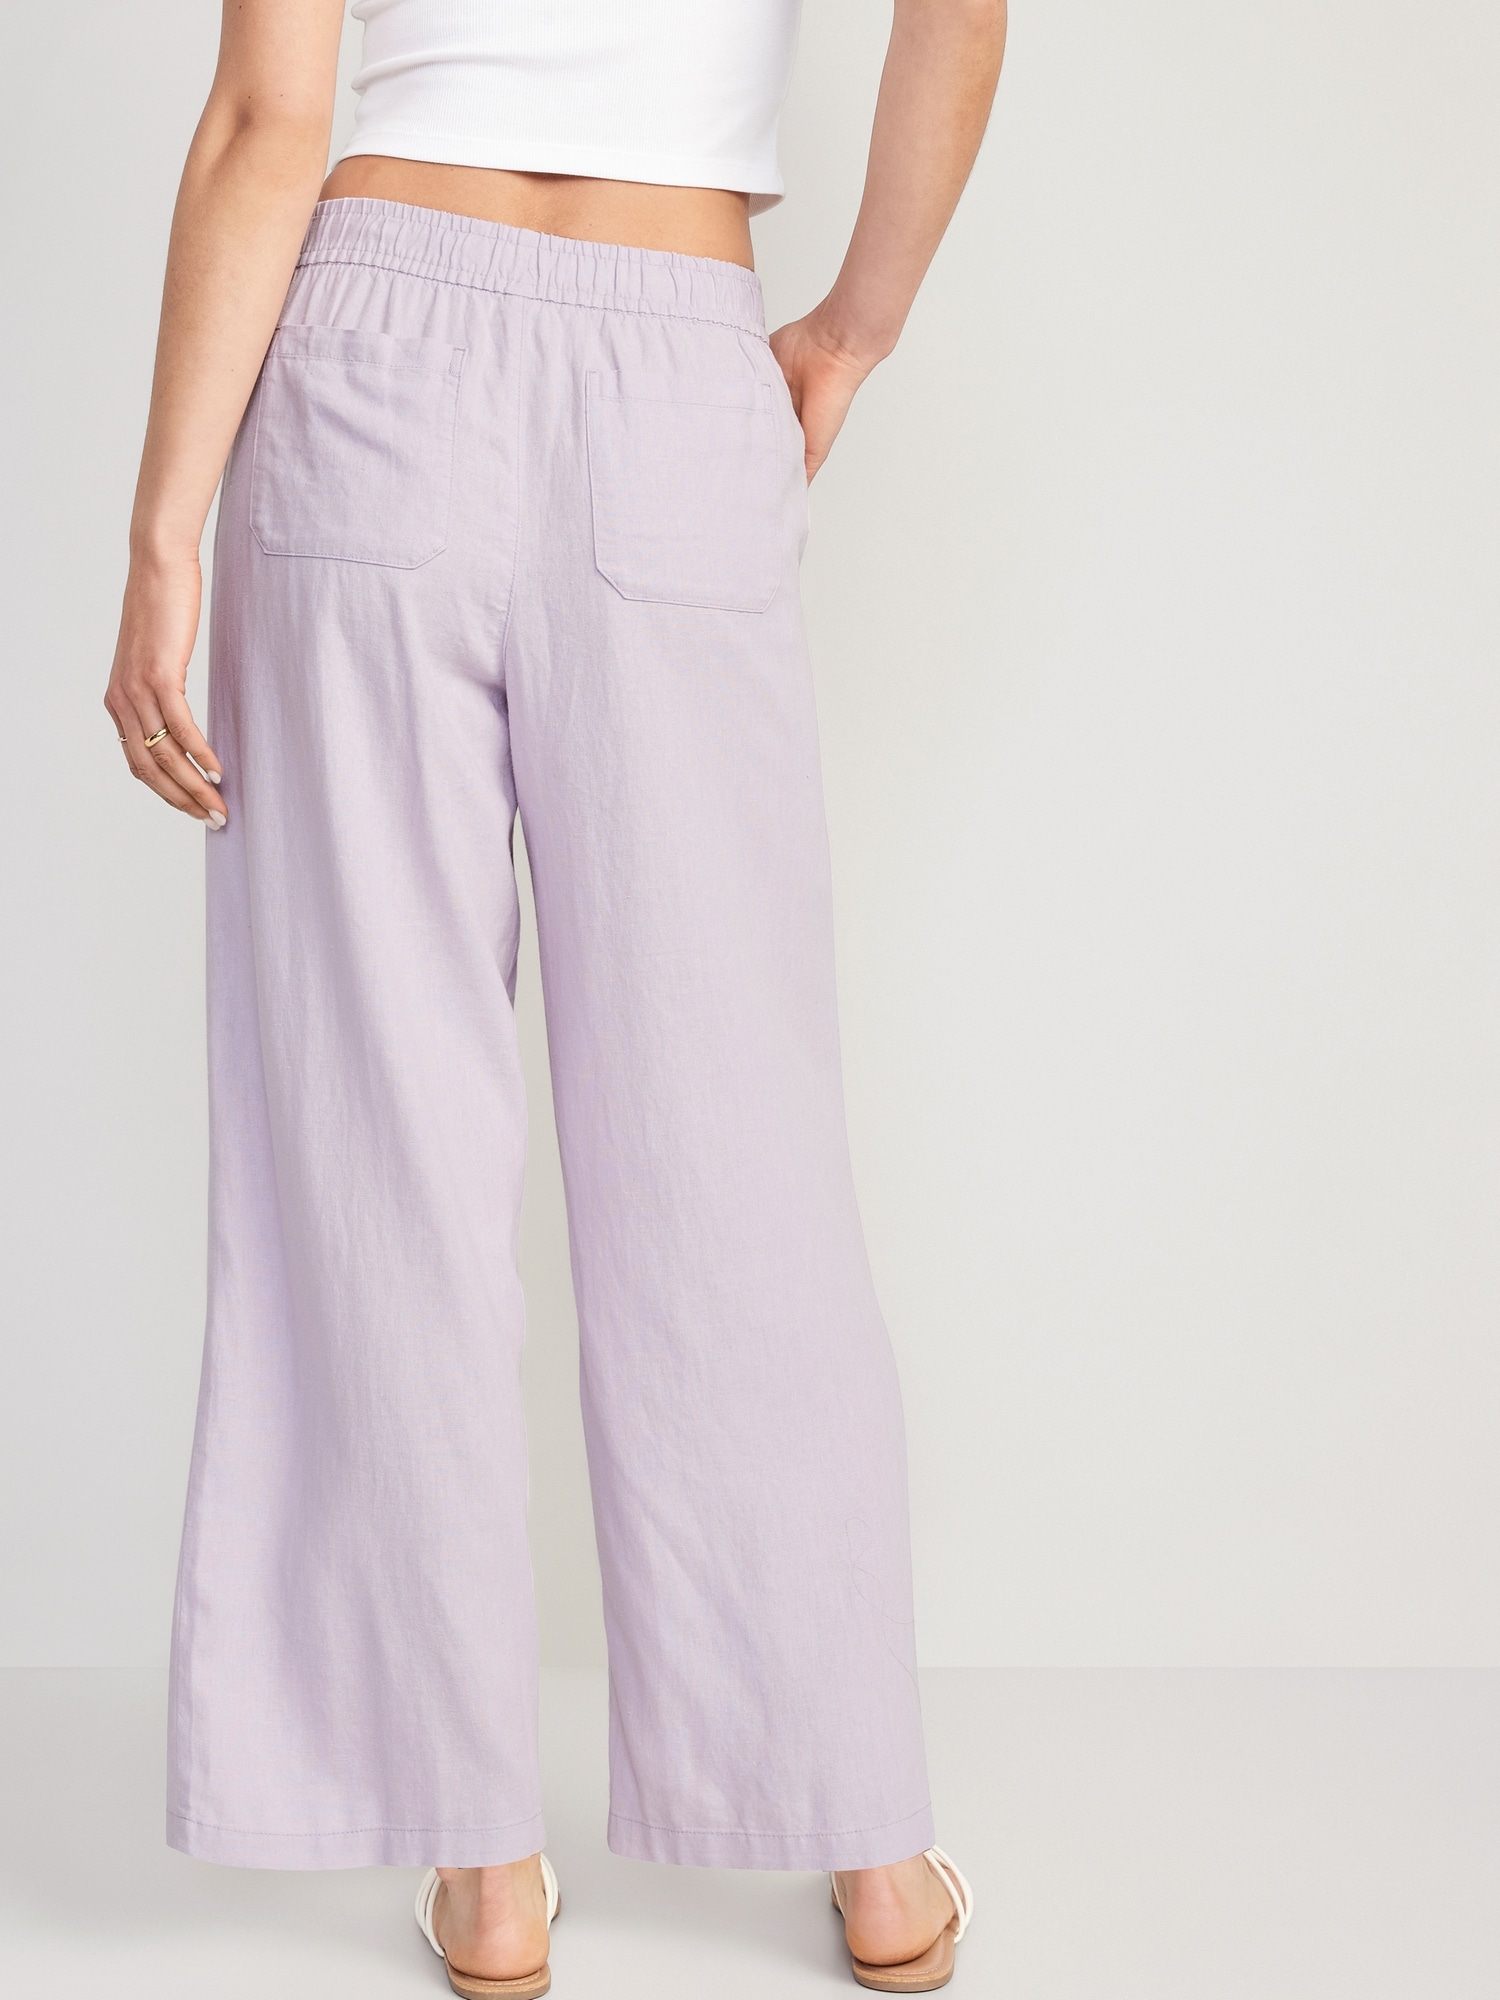 ✨OLD NAVY✨ Wide leg pants that can literally be worn with any